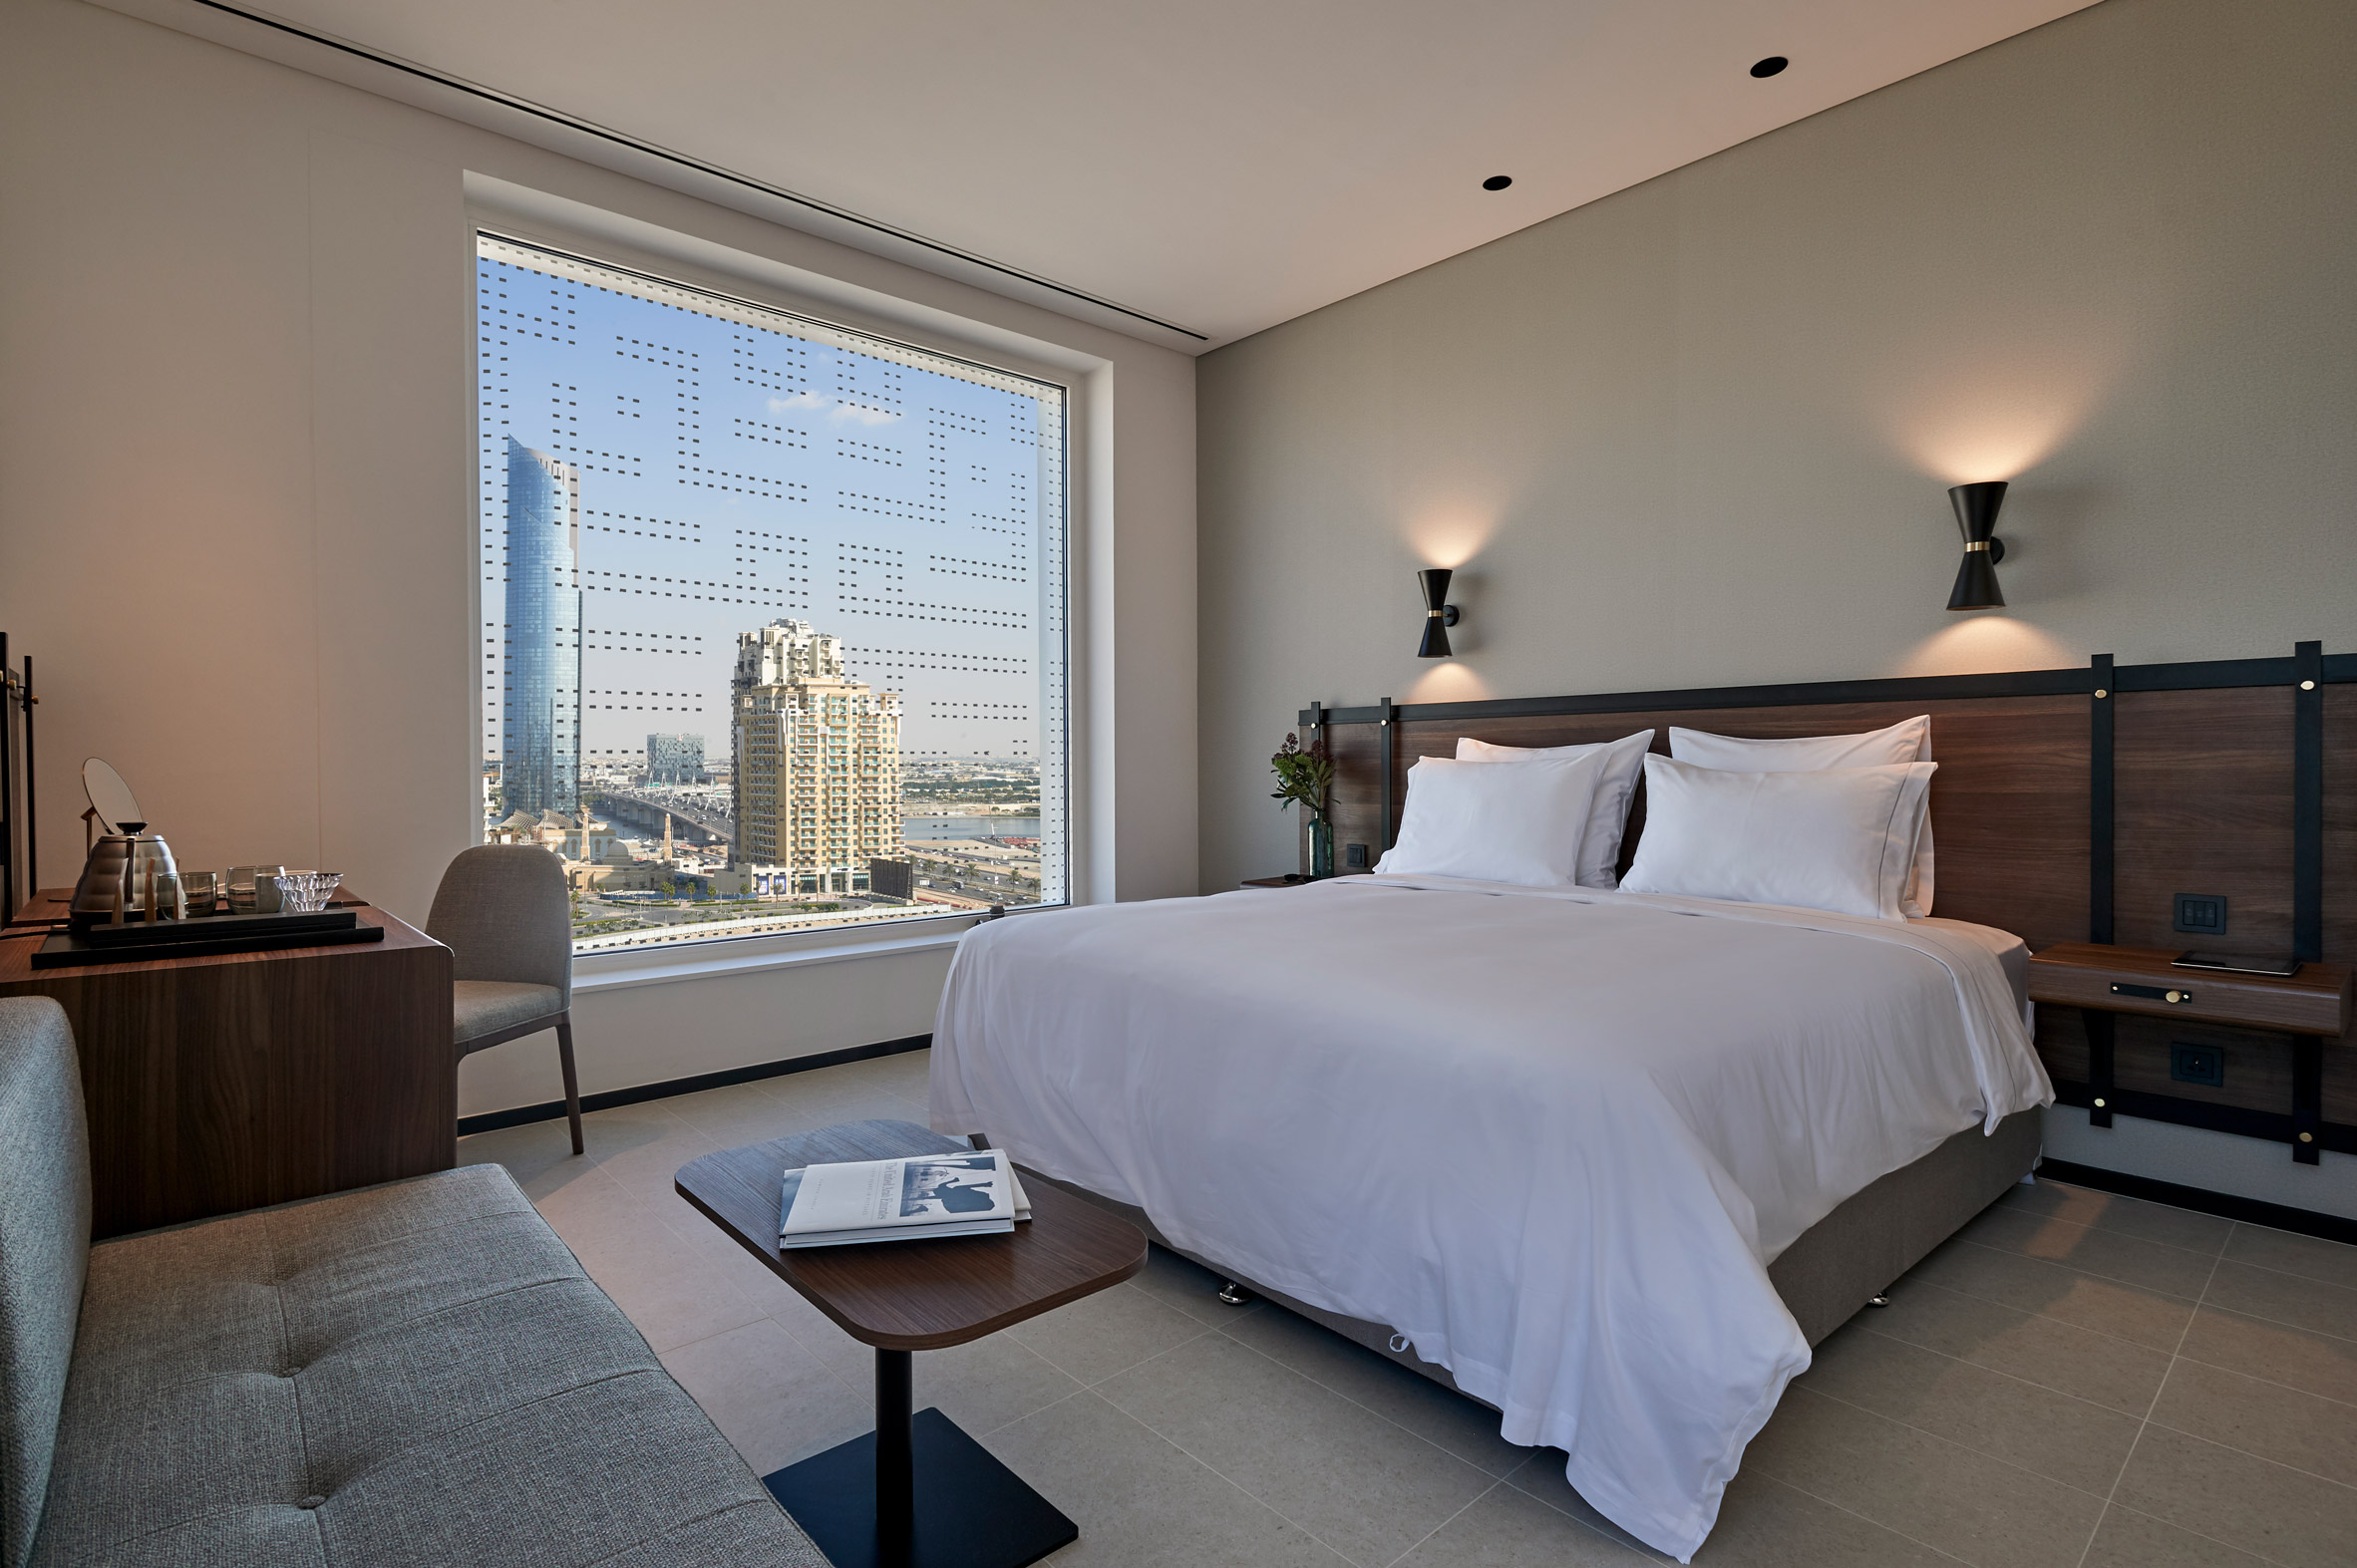 A guest room at Form Hotel Dubai, which won the Urban Hotel category and was named New Concept of the Year at the AHEAD MEA 2018 hospitality awards